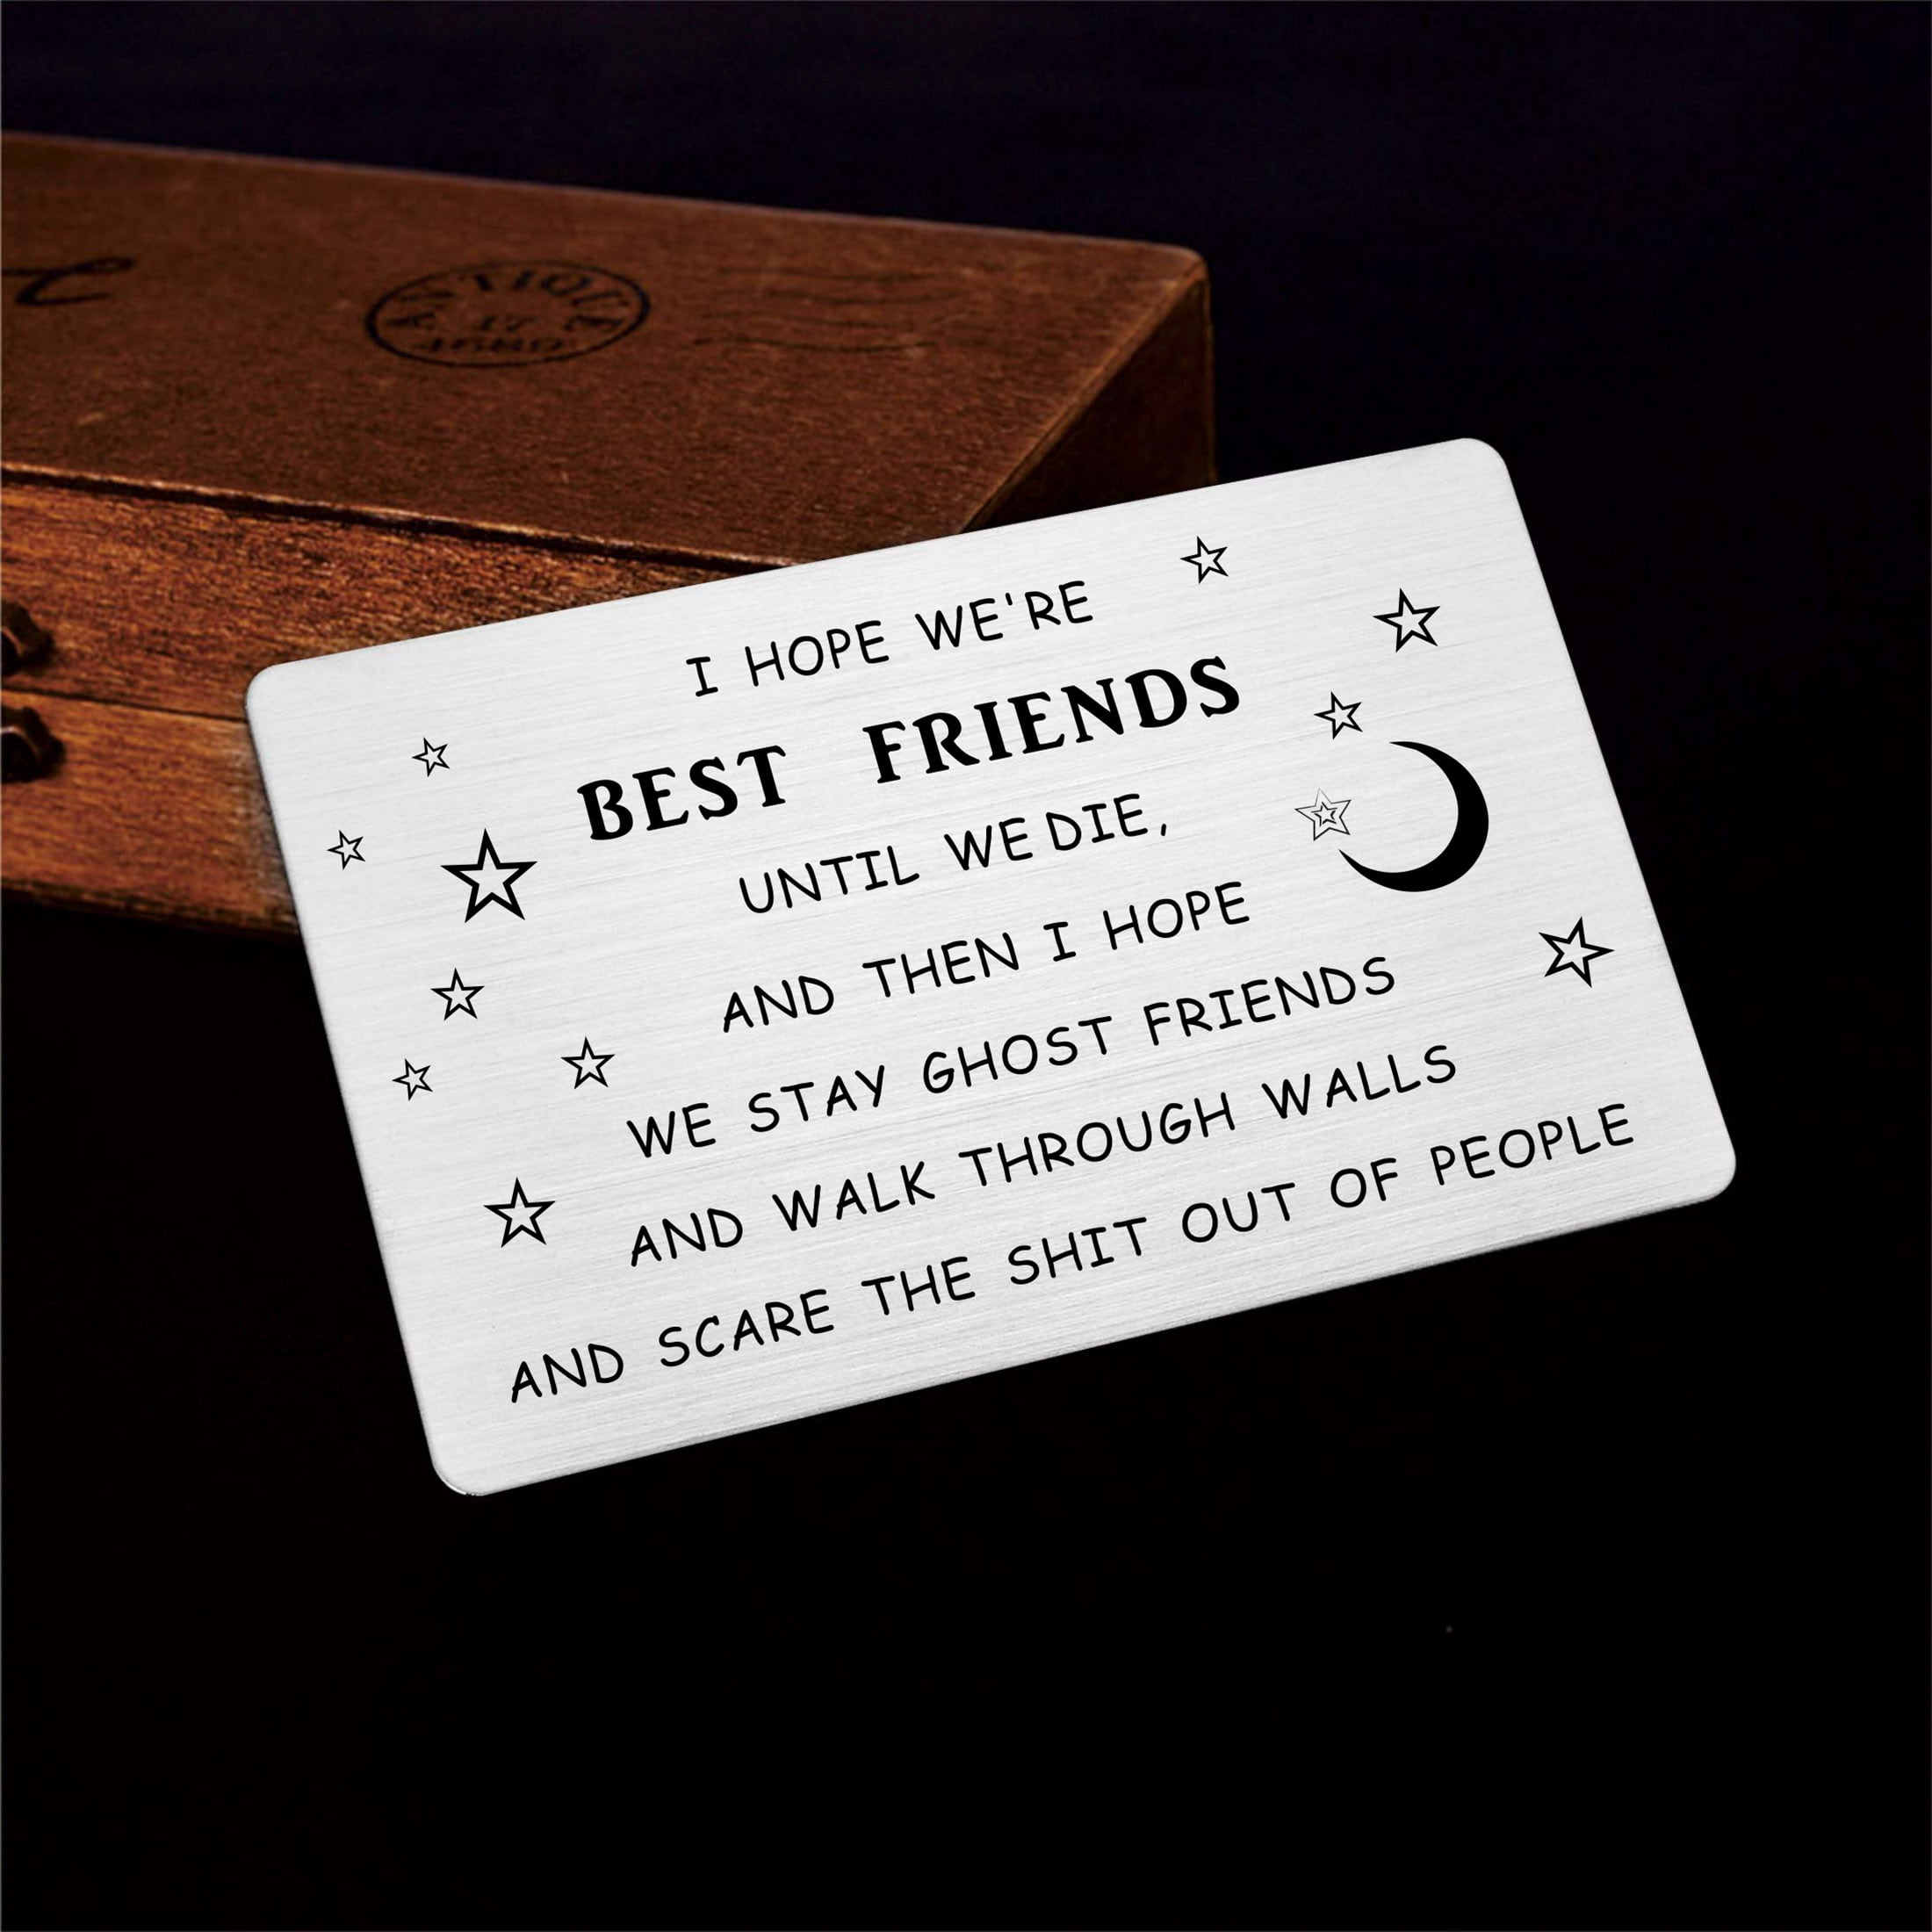 Gift To Humanity Friendship Card By Em & Friends